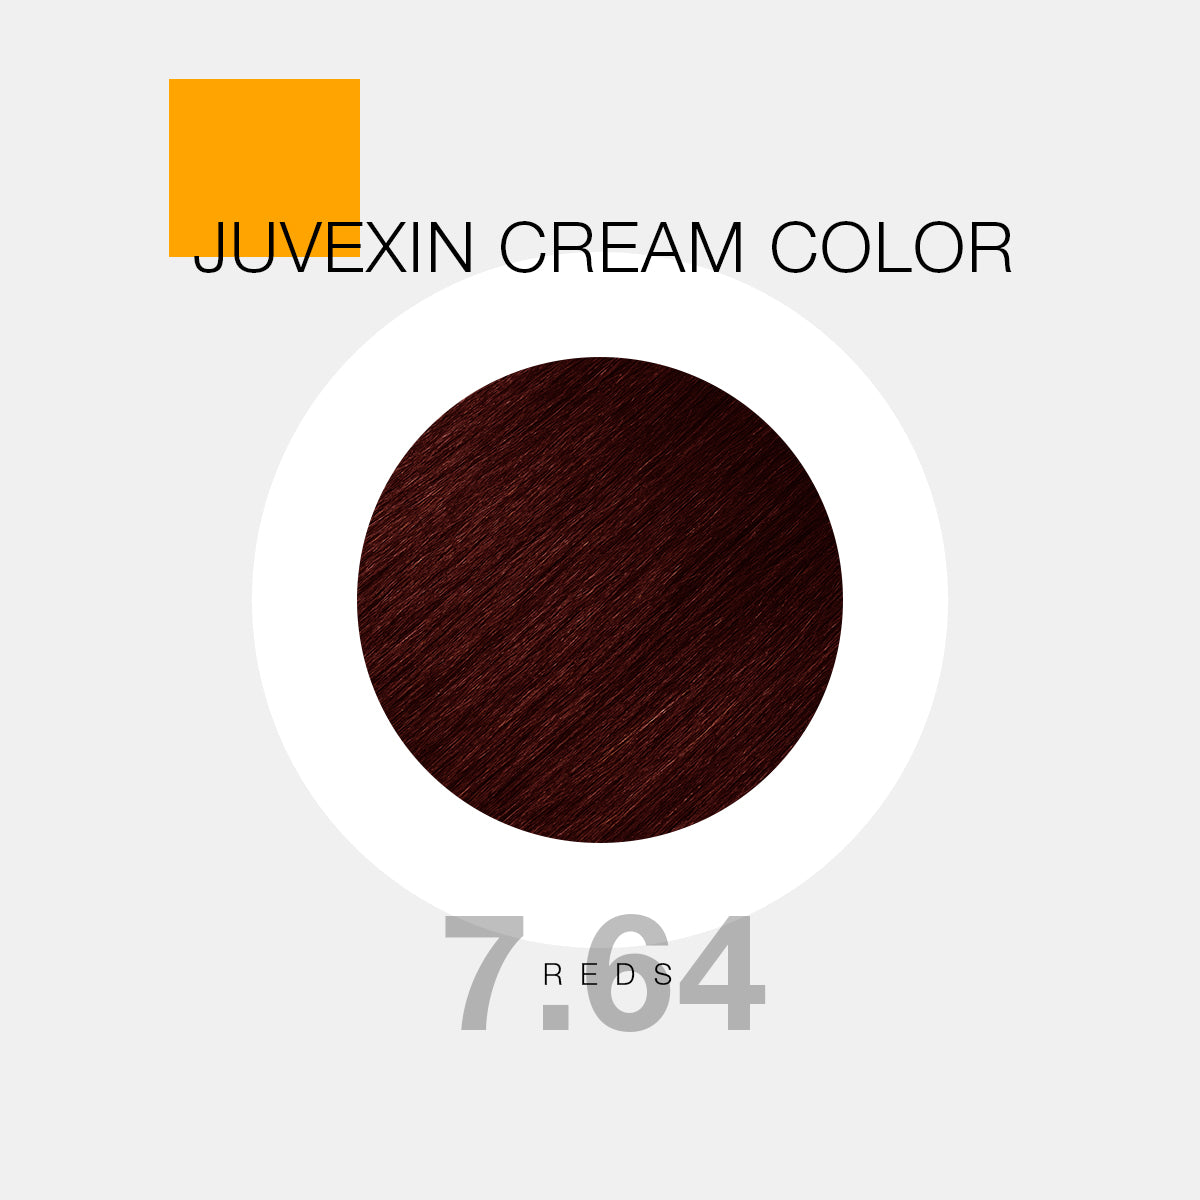 Juvexin Cream Color Pro Reds